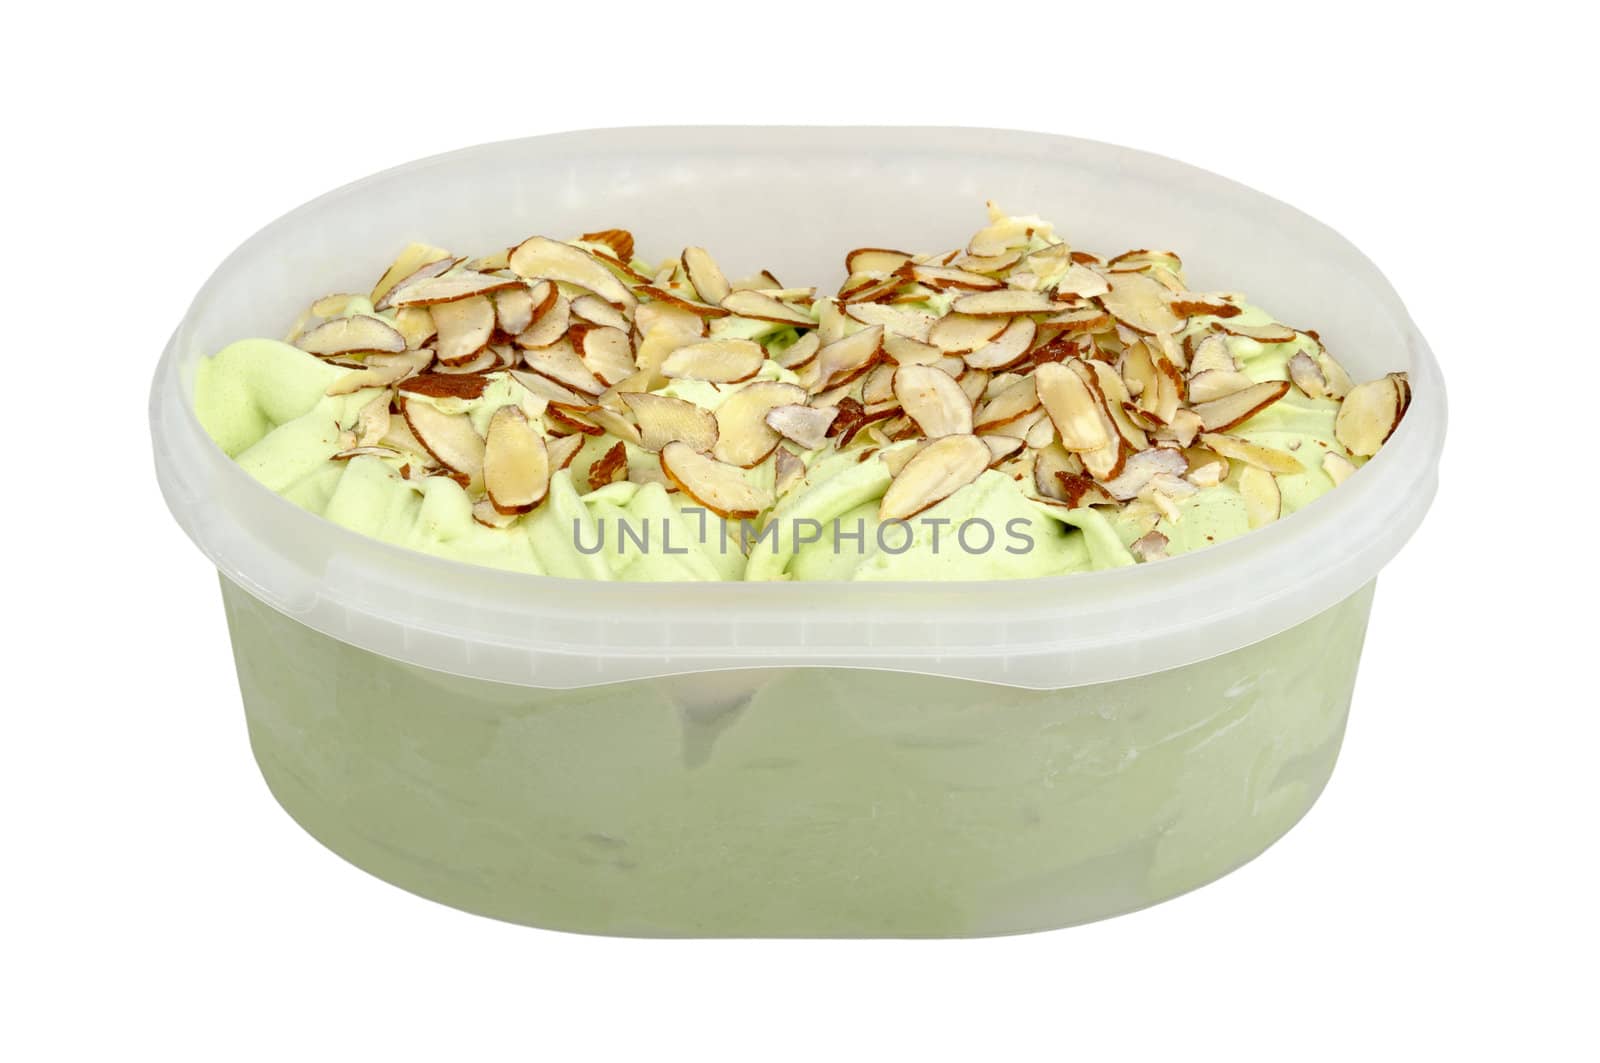 pistachio ice cream with almonds in a plastic cup isolated on white background